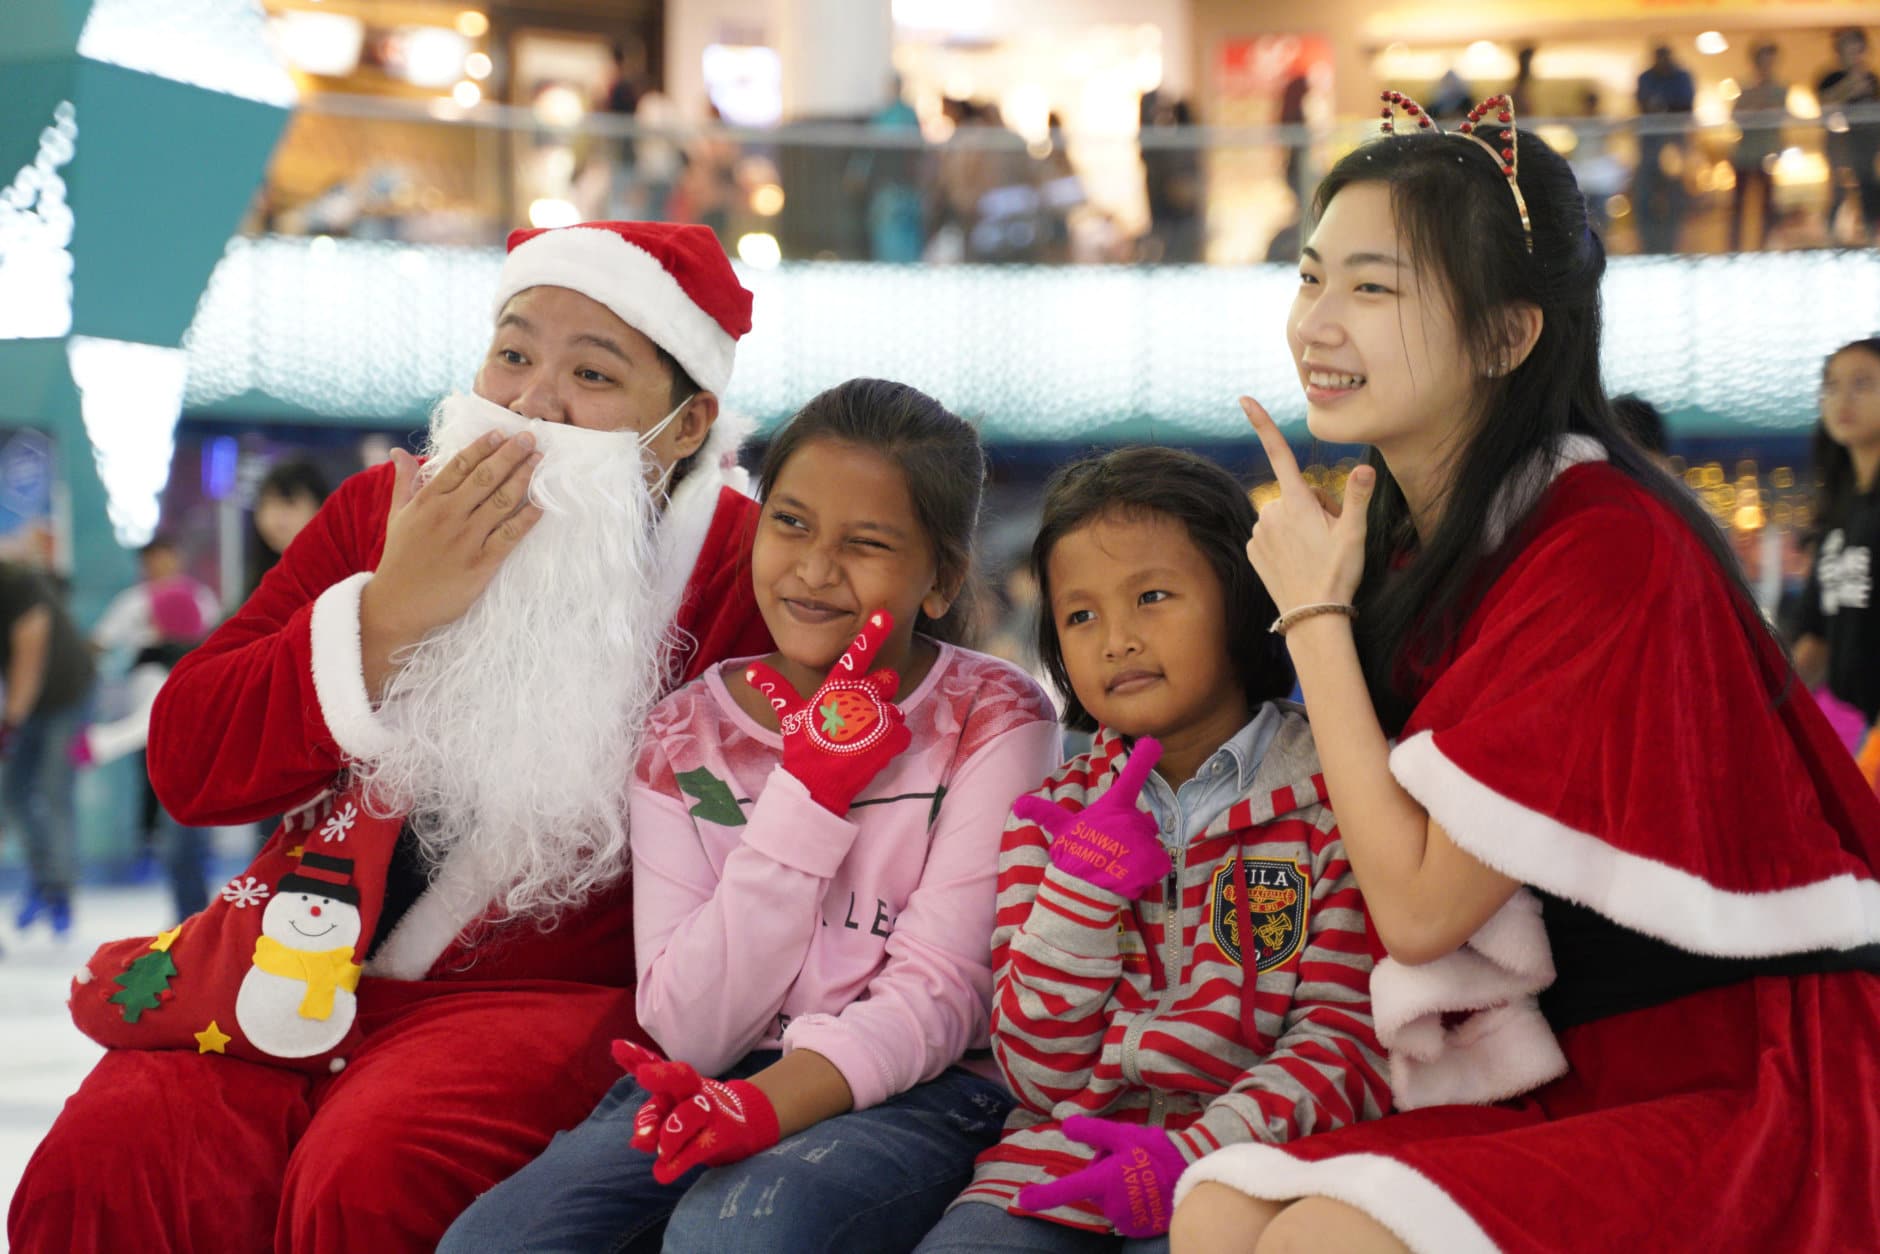 A man dressed as Santa Claus poses with children on Christmas Eve at a shopping mall in Petaling Jaya, Malaysia, Monday, Dec. 24, 2018. Shopping malls in the country have been decorated with Christmas trees, Santa Claus figures and illuminations to attract year-end shoppers. (AP Photo/Yam G-Jun)